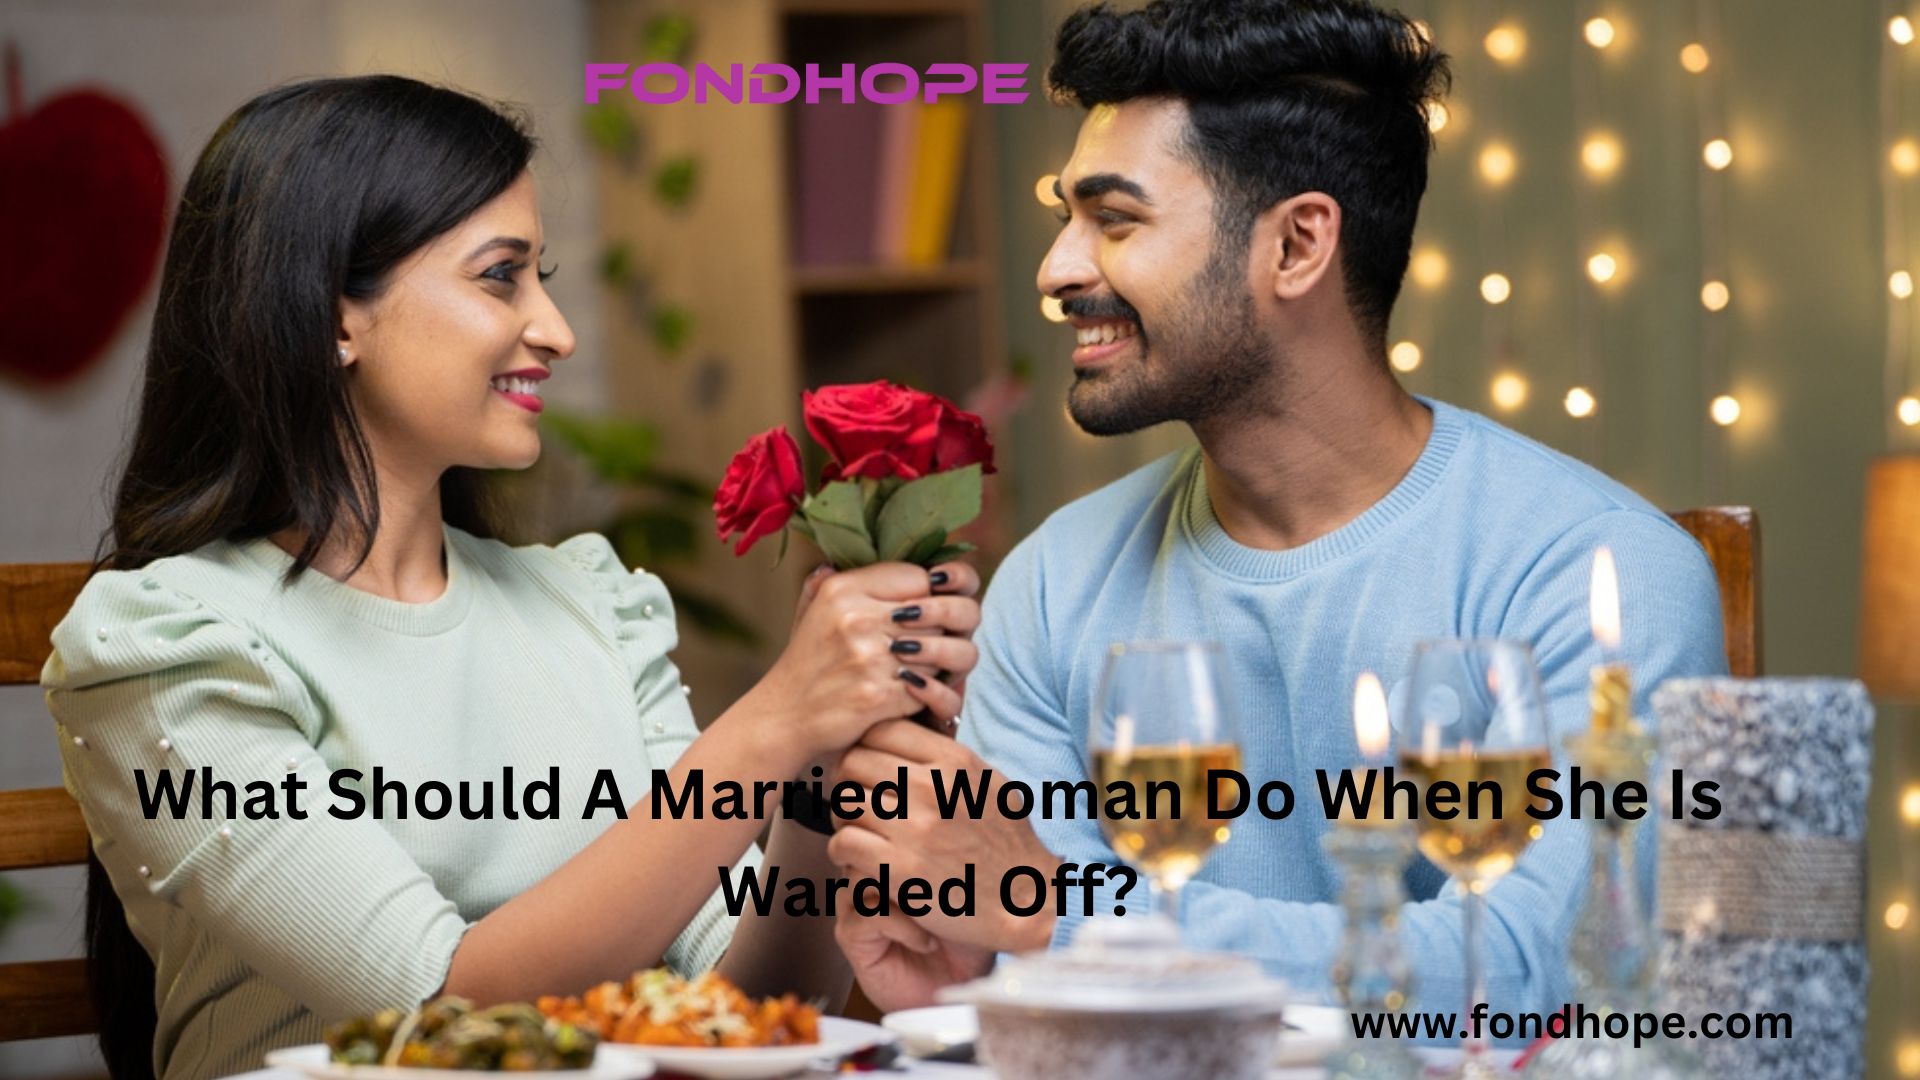 What Should A Married Woman Do When She Is Warded Off?